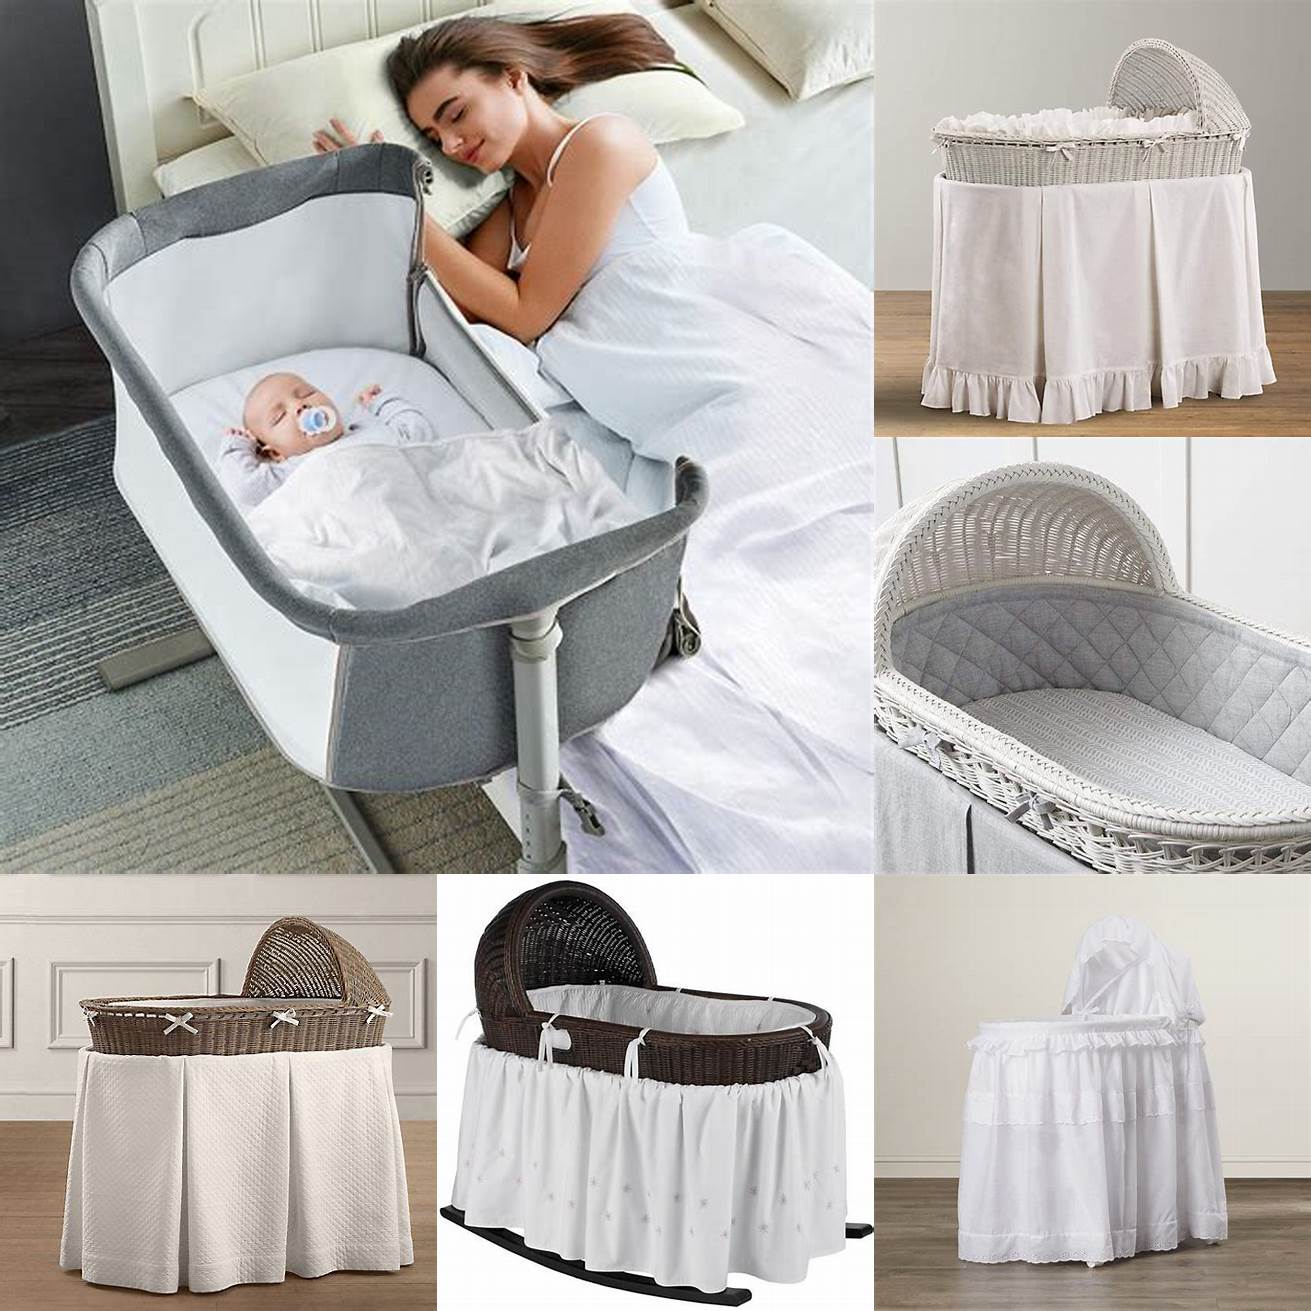 Bassinet Bedding Sets Bassinet bedding sets are designed for use with bassinets and are typically smaller than crib bedding sets They usually include a fitted sheet a skirt and a small blanket or quilt